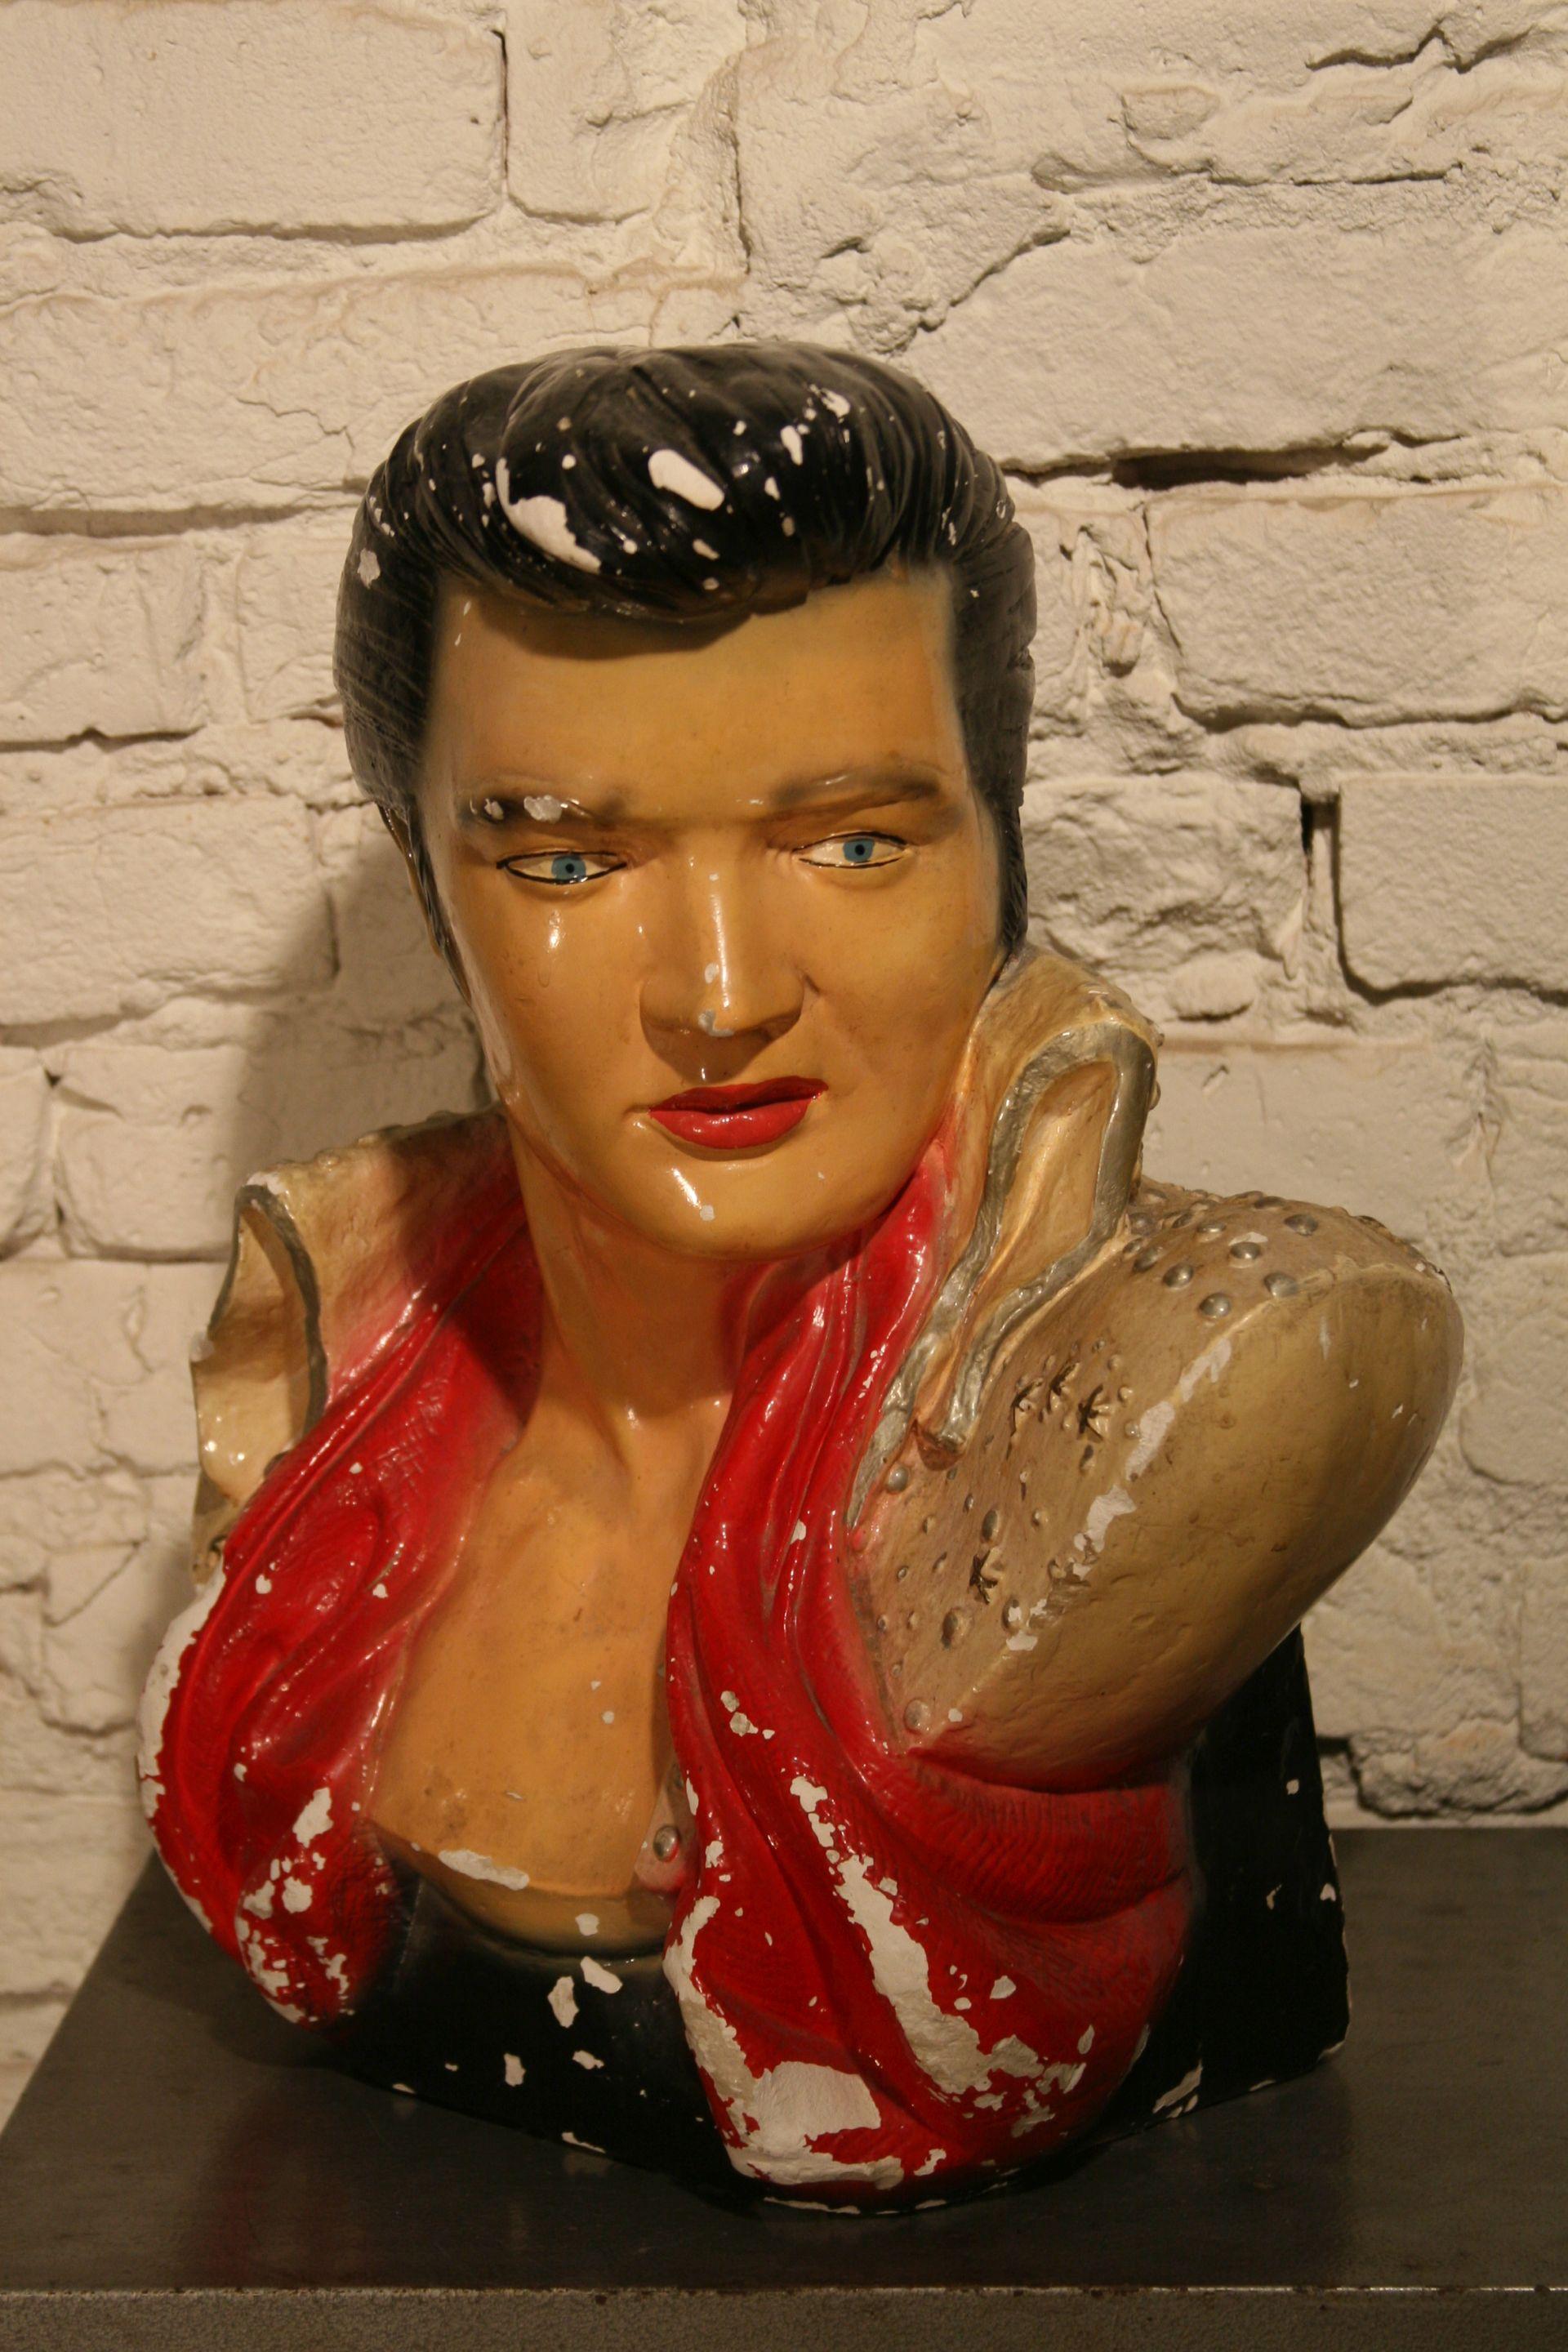 Original figure of the head of King Rock N Roll Elvis Presley made in U.S.A. in the 1970s.
Life-size, made of plaster, hand painted. Material and varnish losses visible in the photographs. The figure has no cracks or any signs of